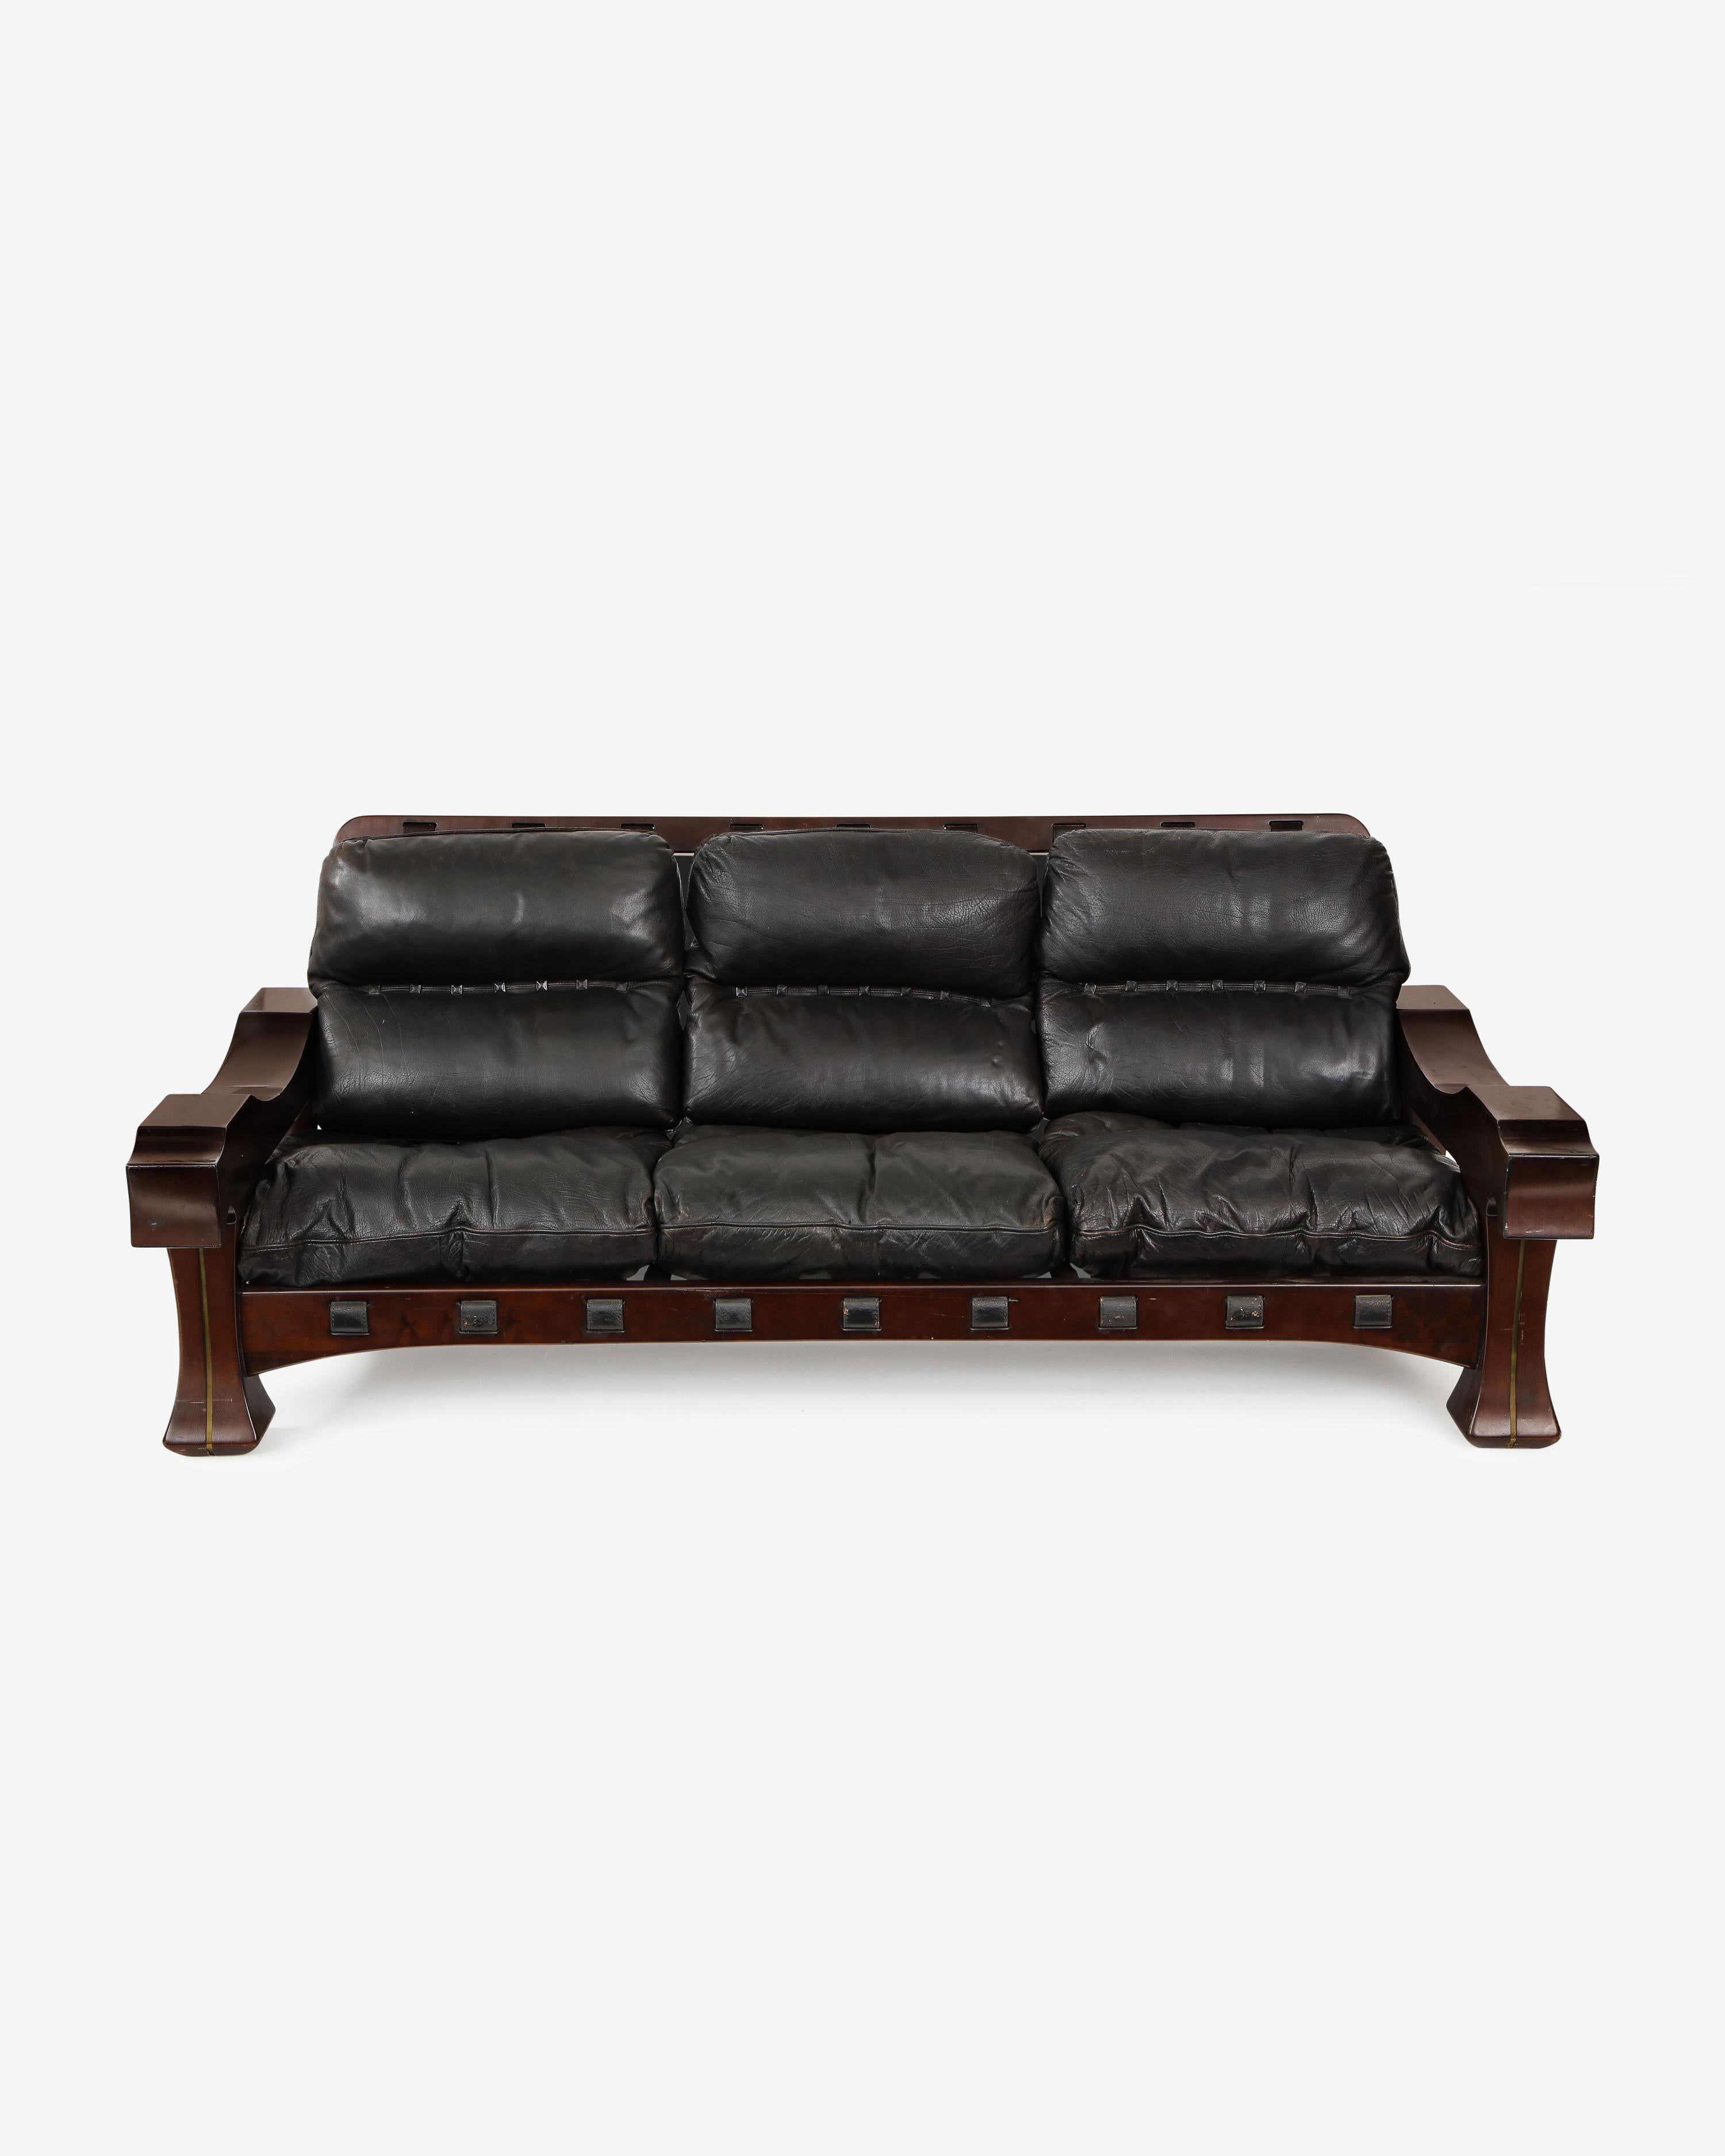 Ussaro sofa by Luciano Frigerio in tropical wood, black leather and brass. These chairs embody the solid and sturdy masculine style emblematic of Frigerio's designs. The mixed media construction of these unique models enhance their esoteric